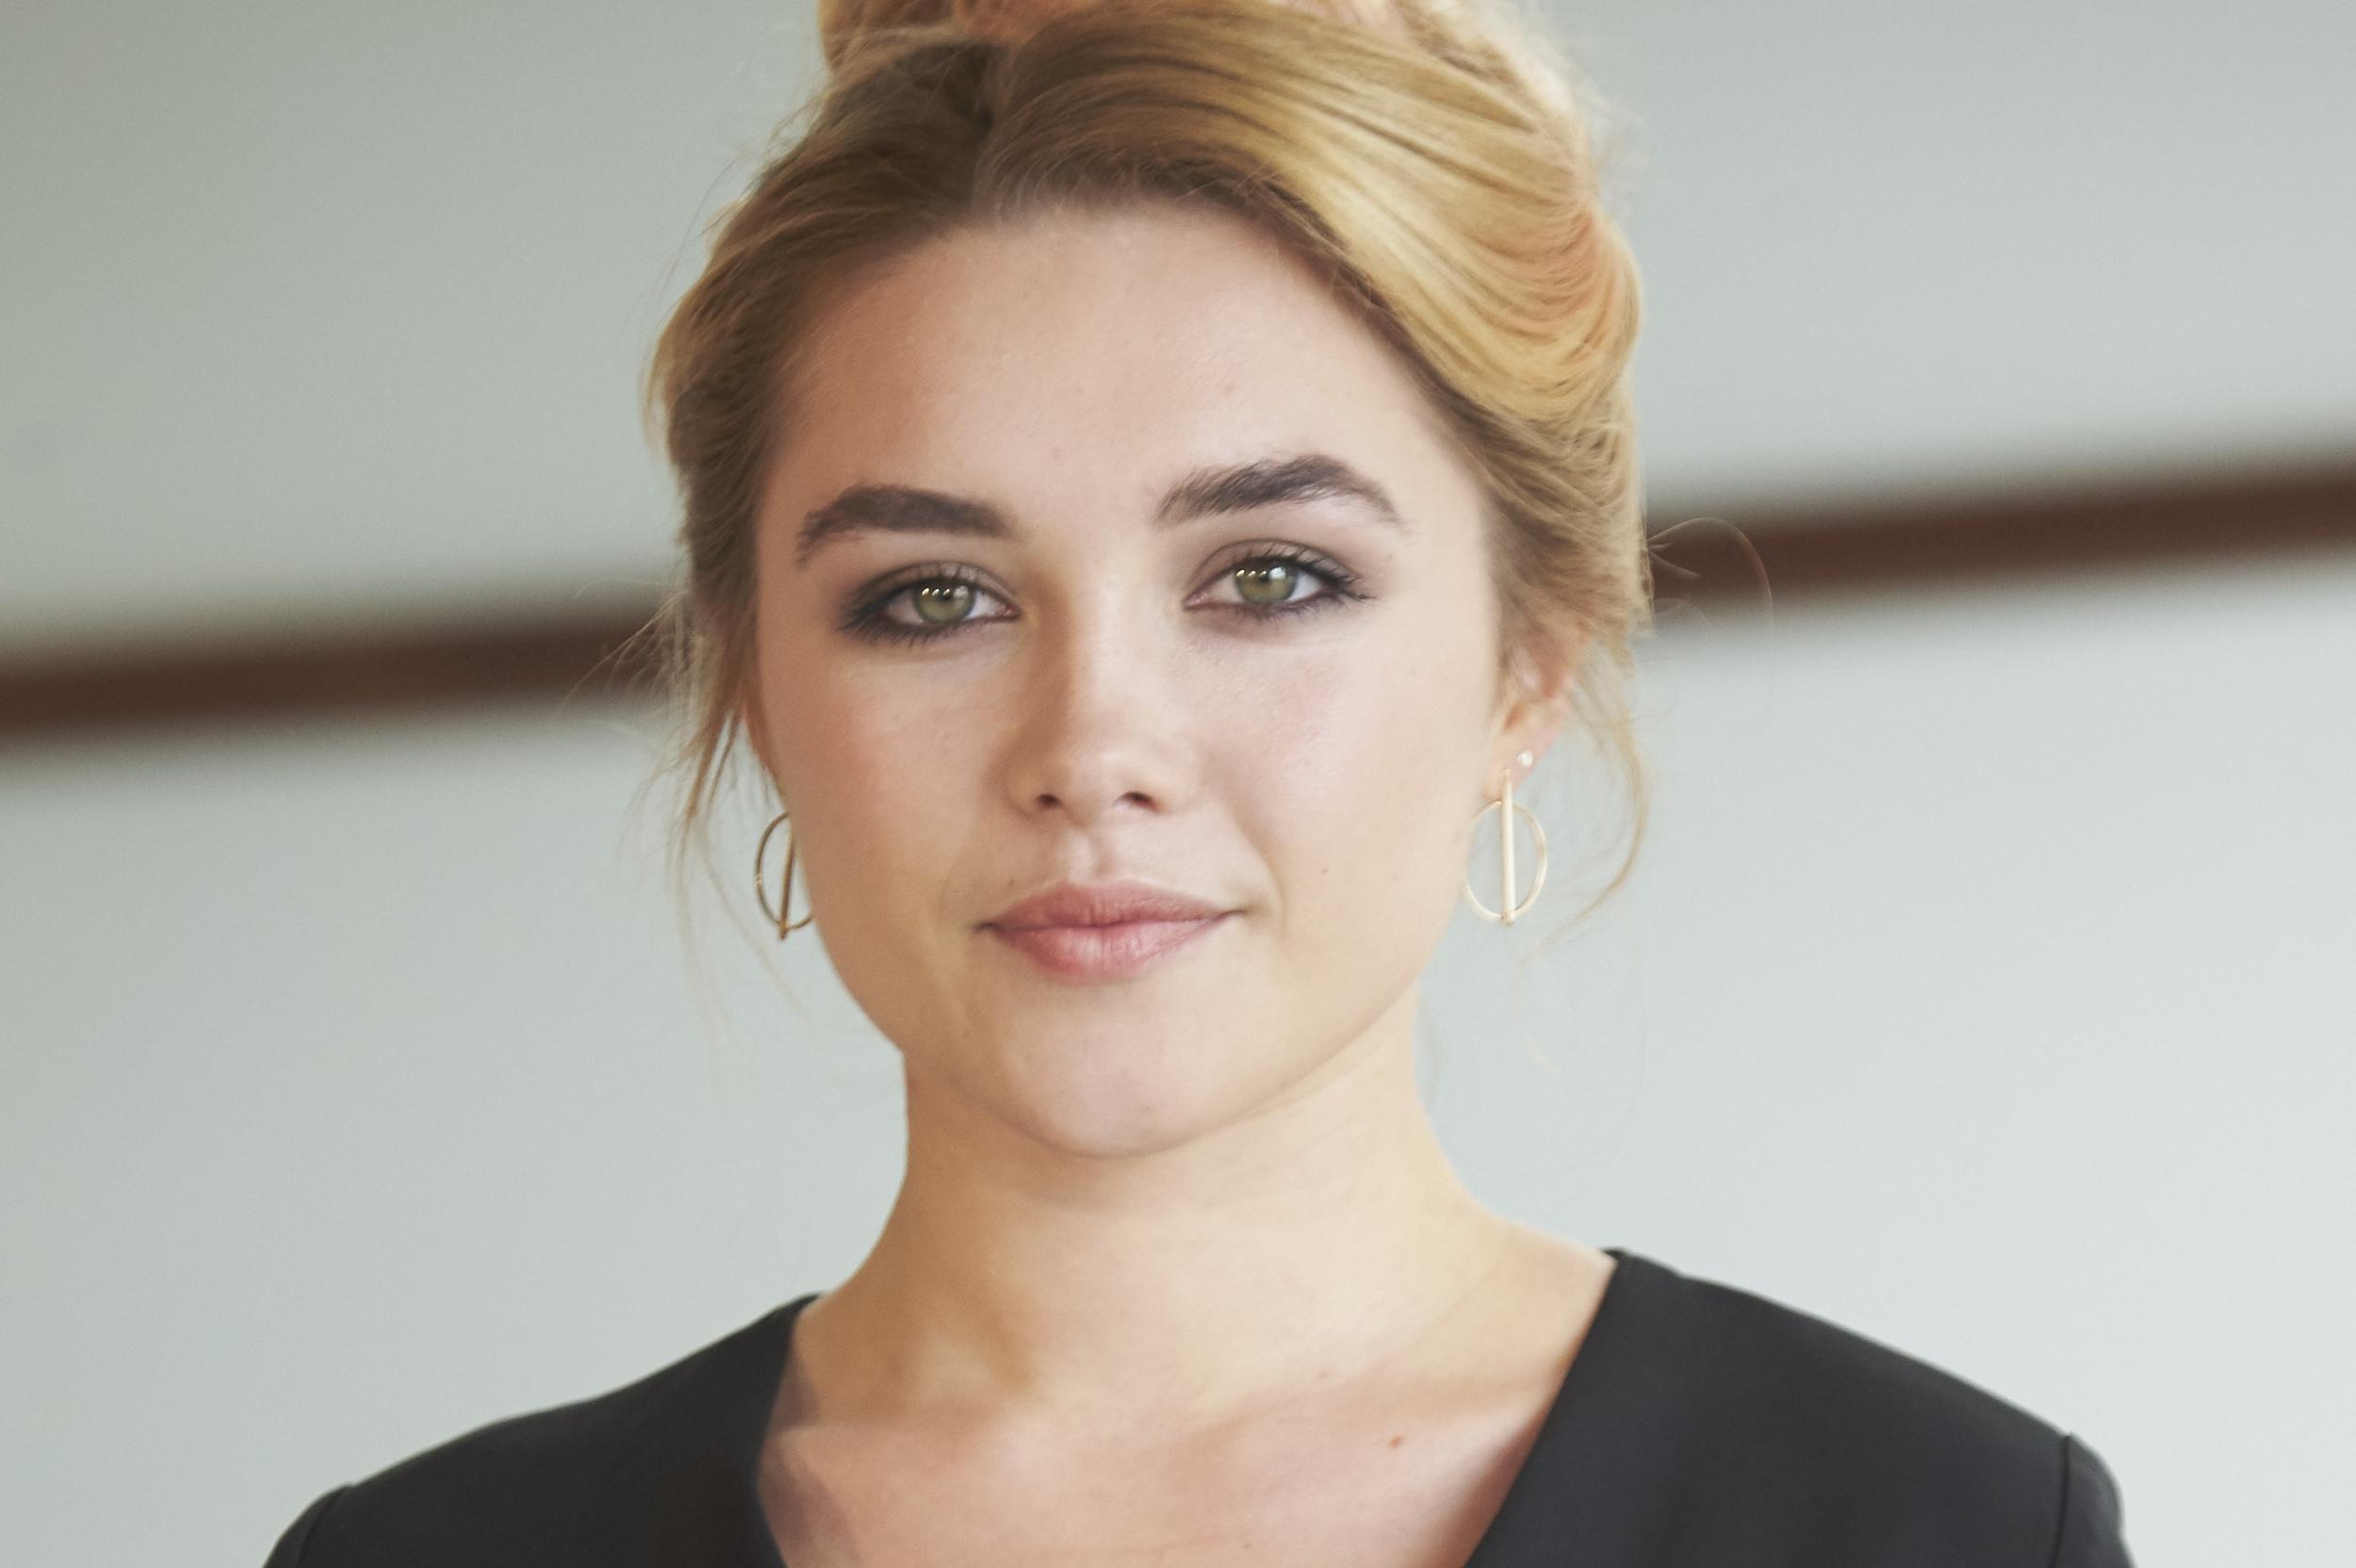 Florence Pugh says BBC tempered nudity in The Little Drummer Girl to